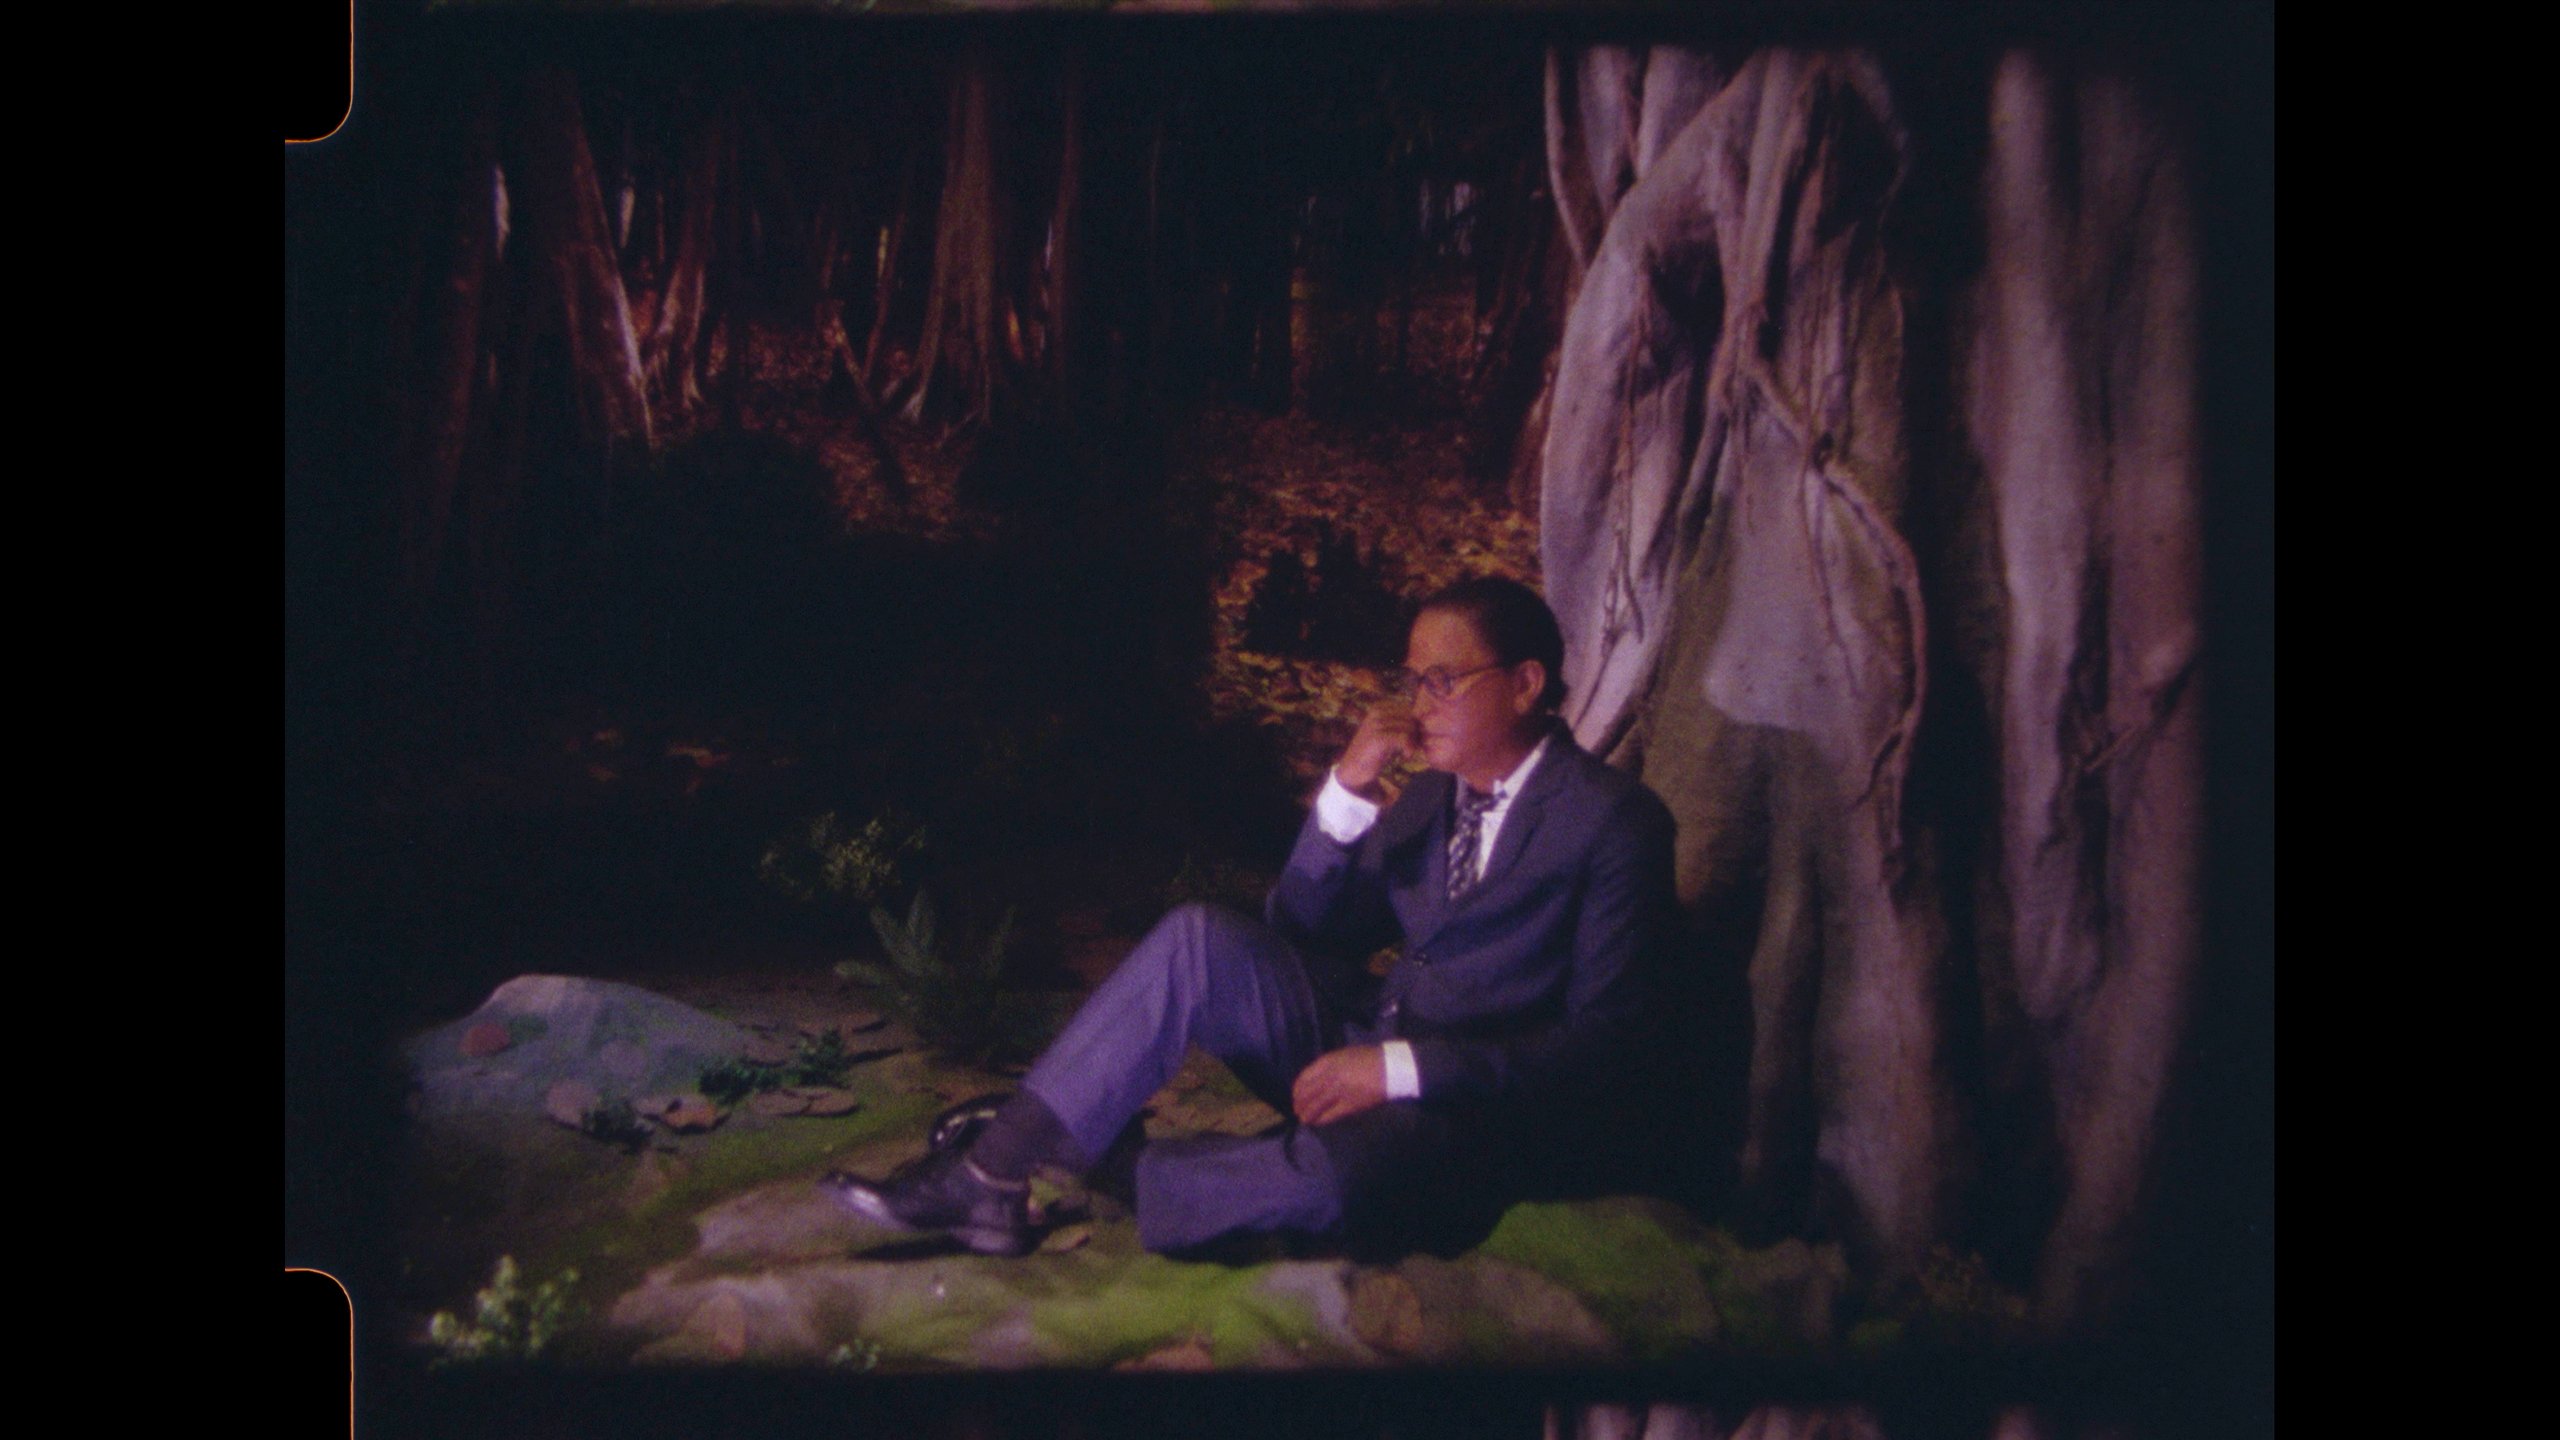 A man is seated on the ground in a forest at the base of a tree, wearing glasses and a suit. The forest is in darkness but the man is illuminated by artificial light. The photograph is taken on analogue film, and the sprockets on one side are visible.